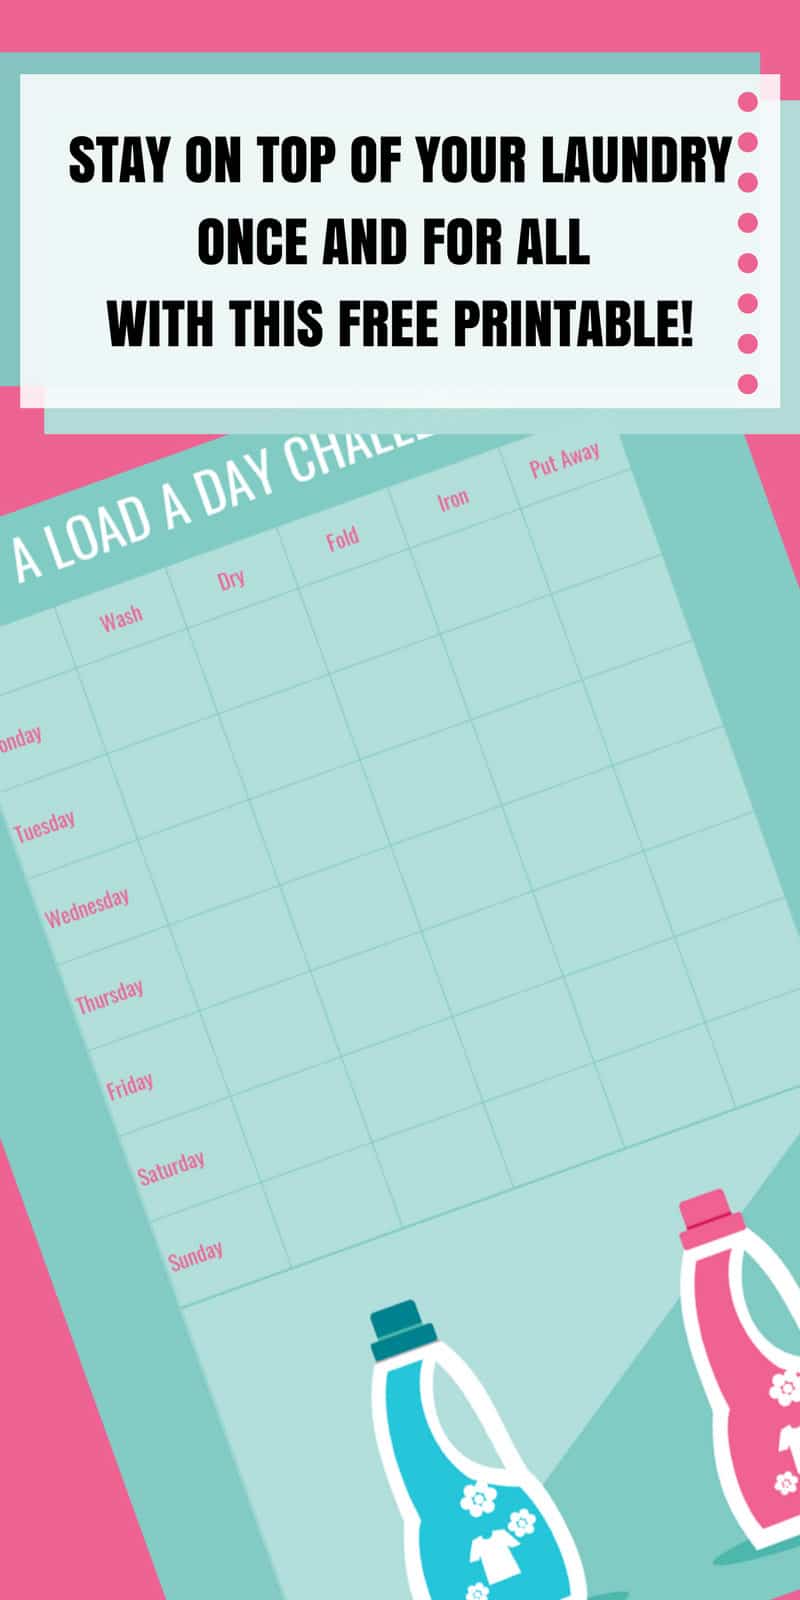 Laundry Routine Printable - stop failing at laundry once and for all by joining the load a day challenge with this free printable!